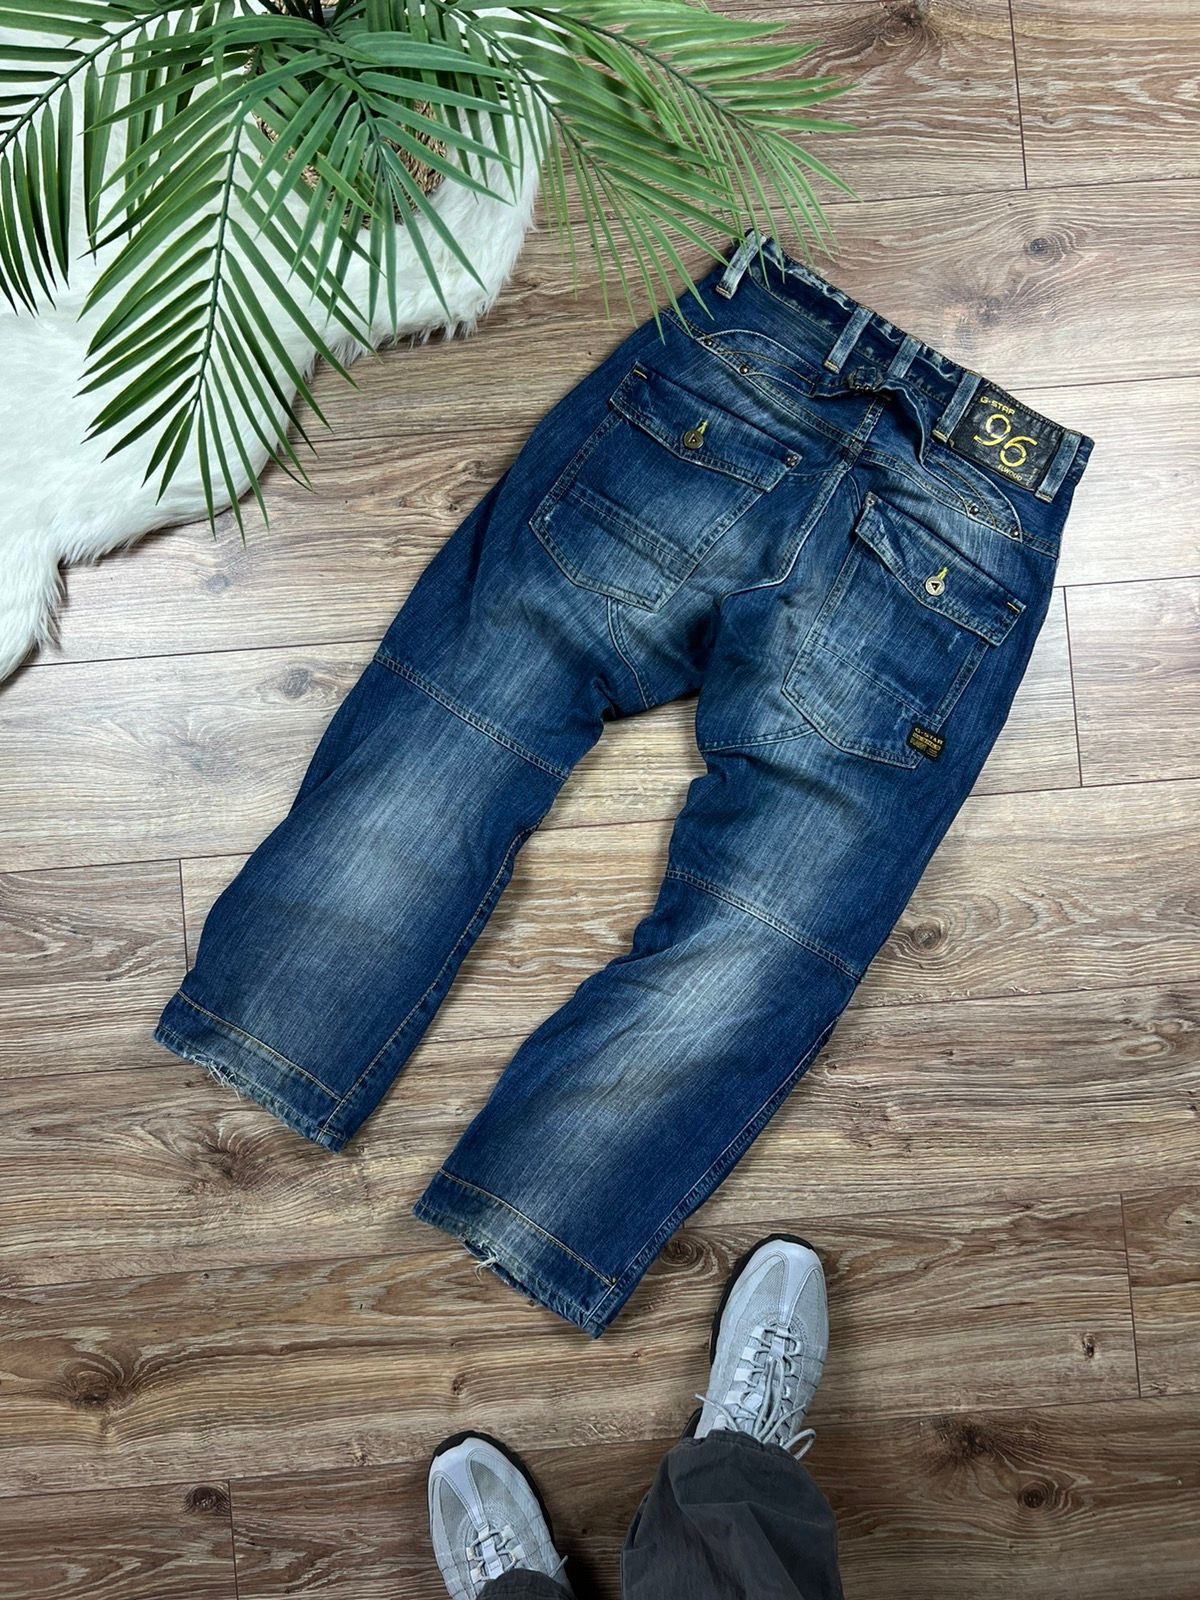 Vintage 💫 90’S G-STAR RAW VINTAGE DOUBLE KNEE OPIUM WASHED JEANS Size US 30 / EU 46 - 1 Preview